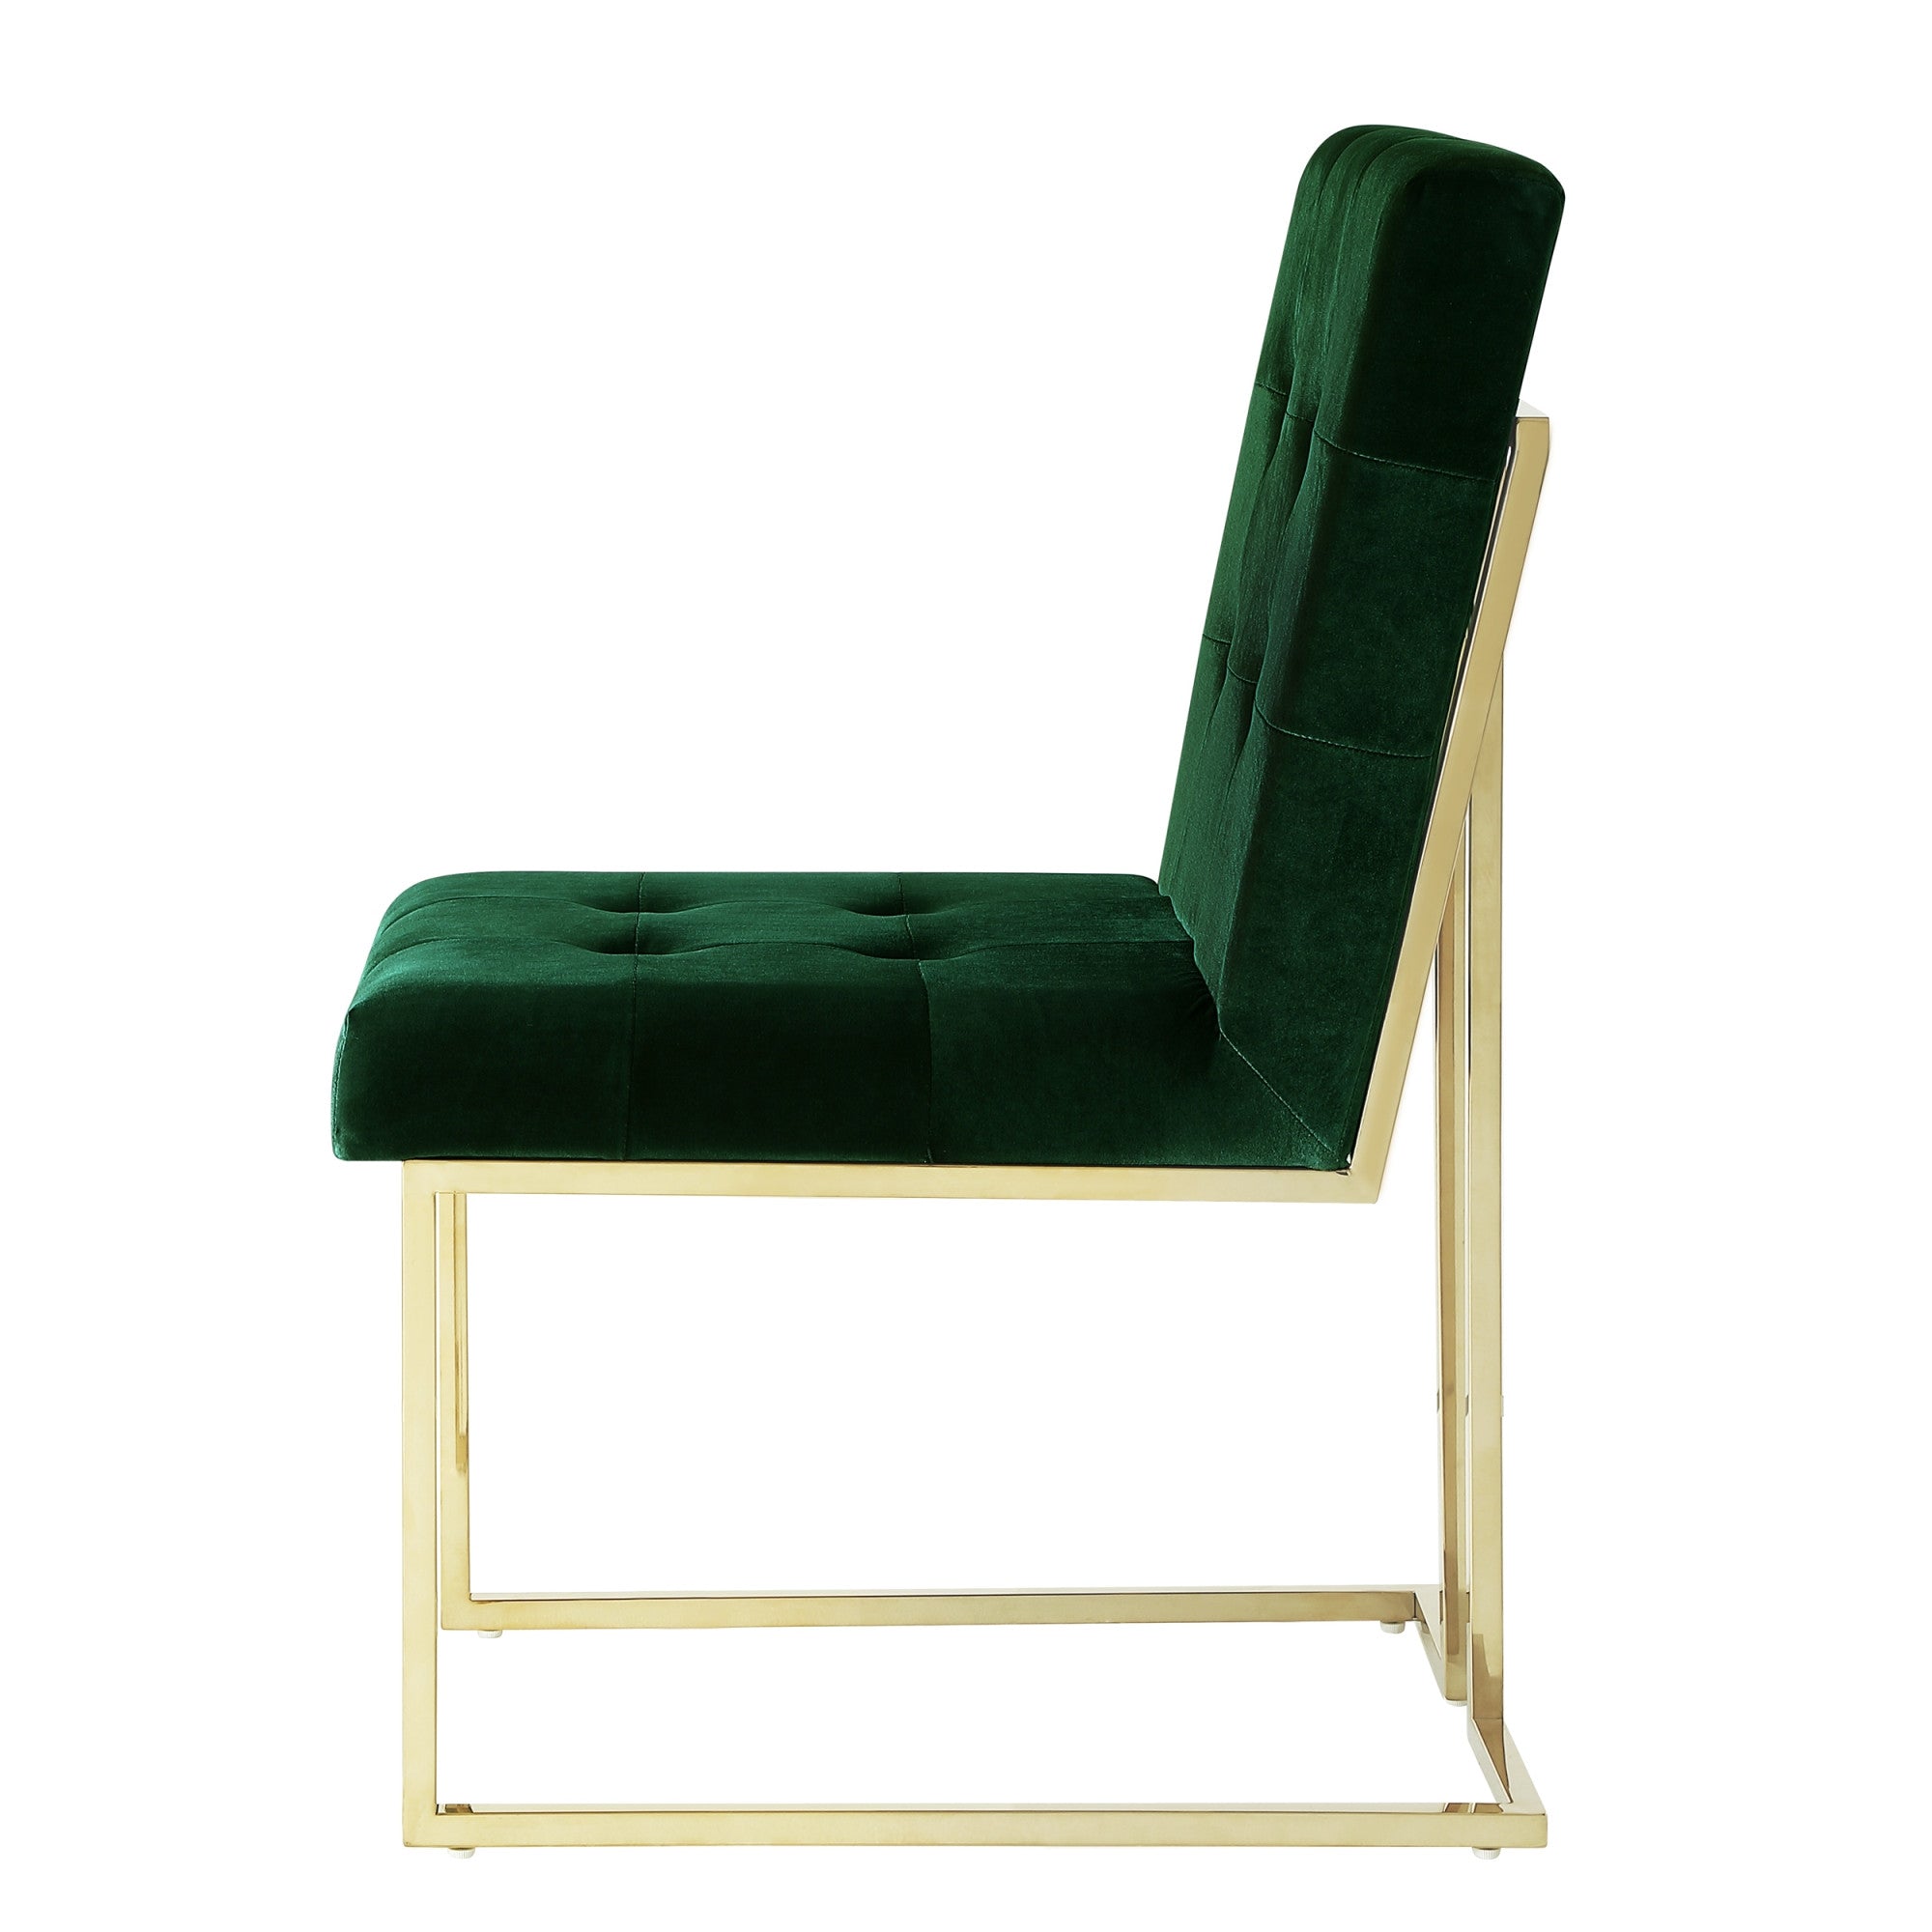 Set of Two Tufted Hunter Green and Gold Upholstered Velvet Dining Side Chairs